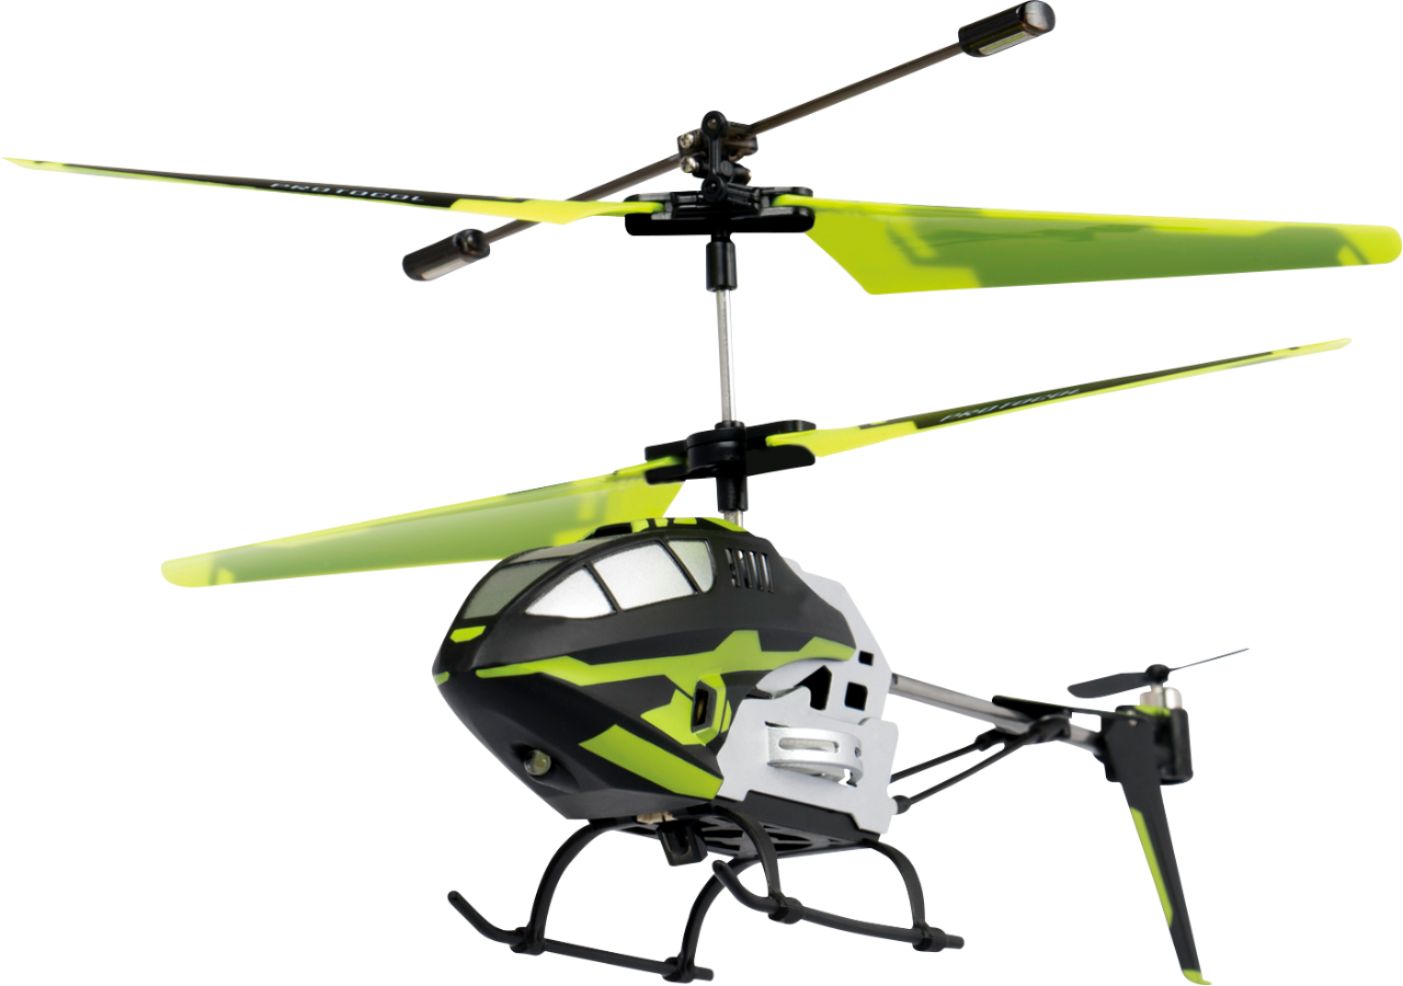 real remote control helicopter